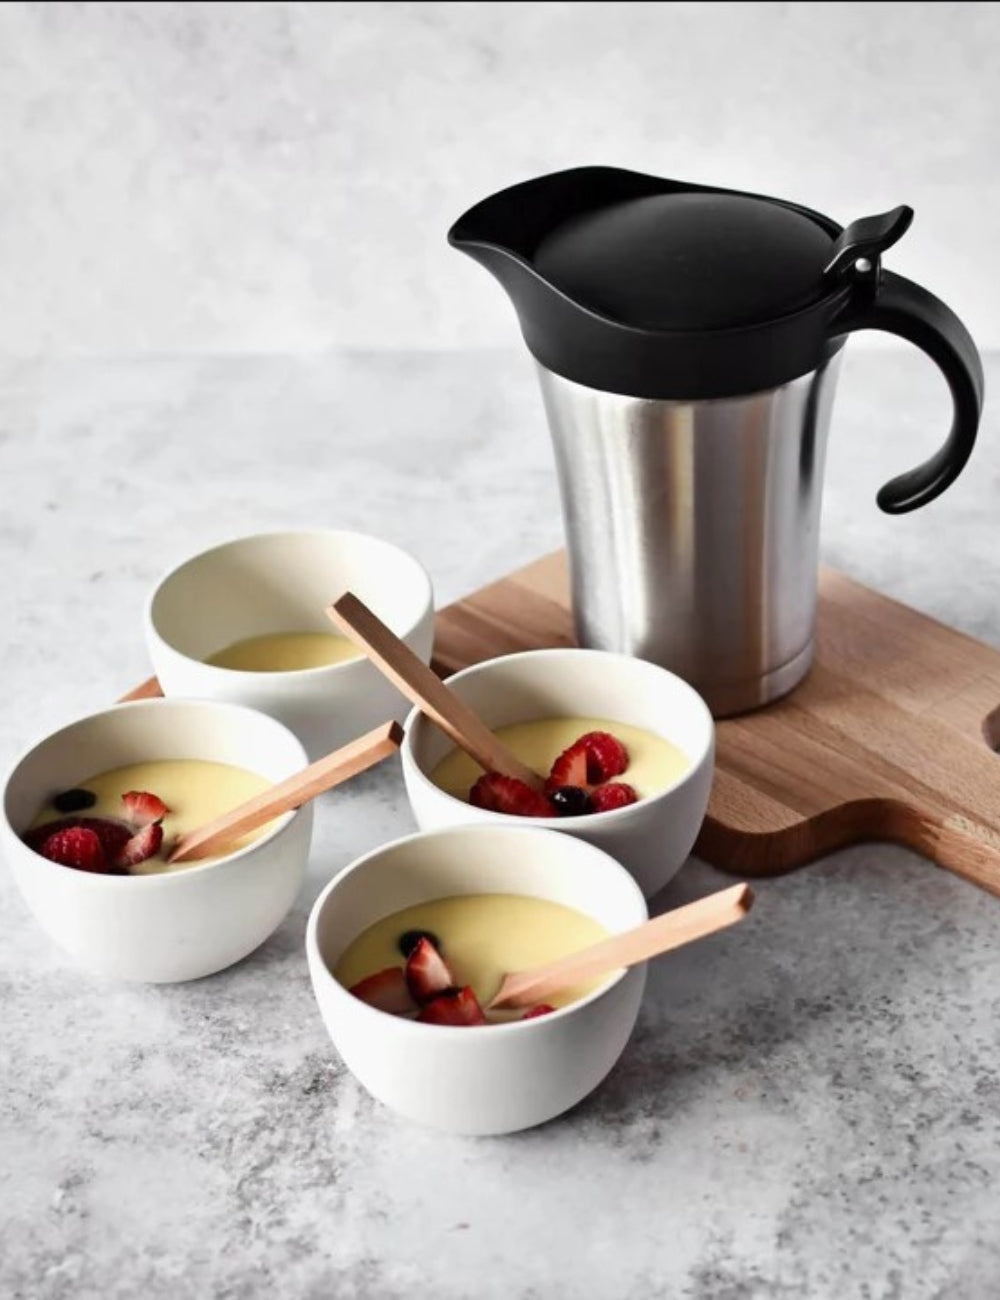 Thermomix® Jug: Keep Your Sauces Hot and Fresh All Day Long